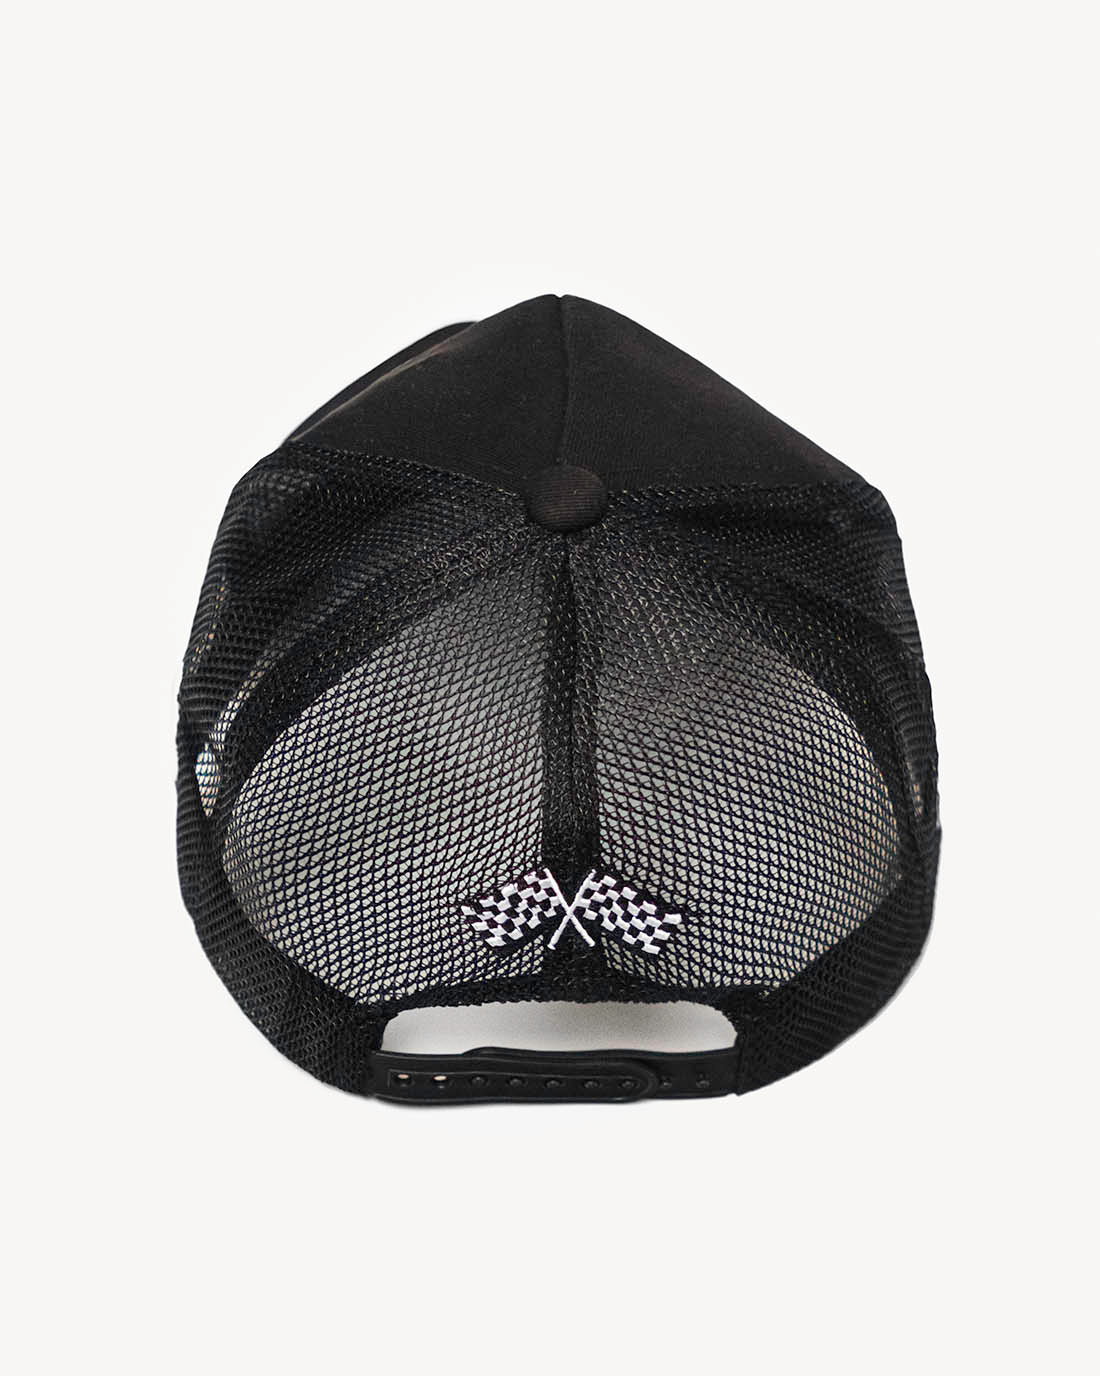 Rear view of a summery black snapback hat with stylish Italian-inspired embroidered design and cooling mesh back.